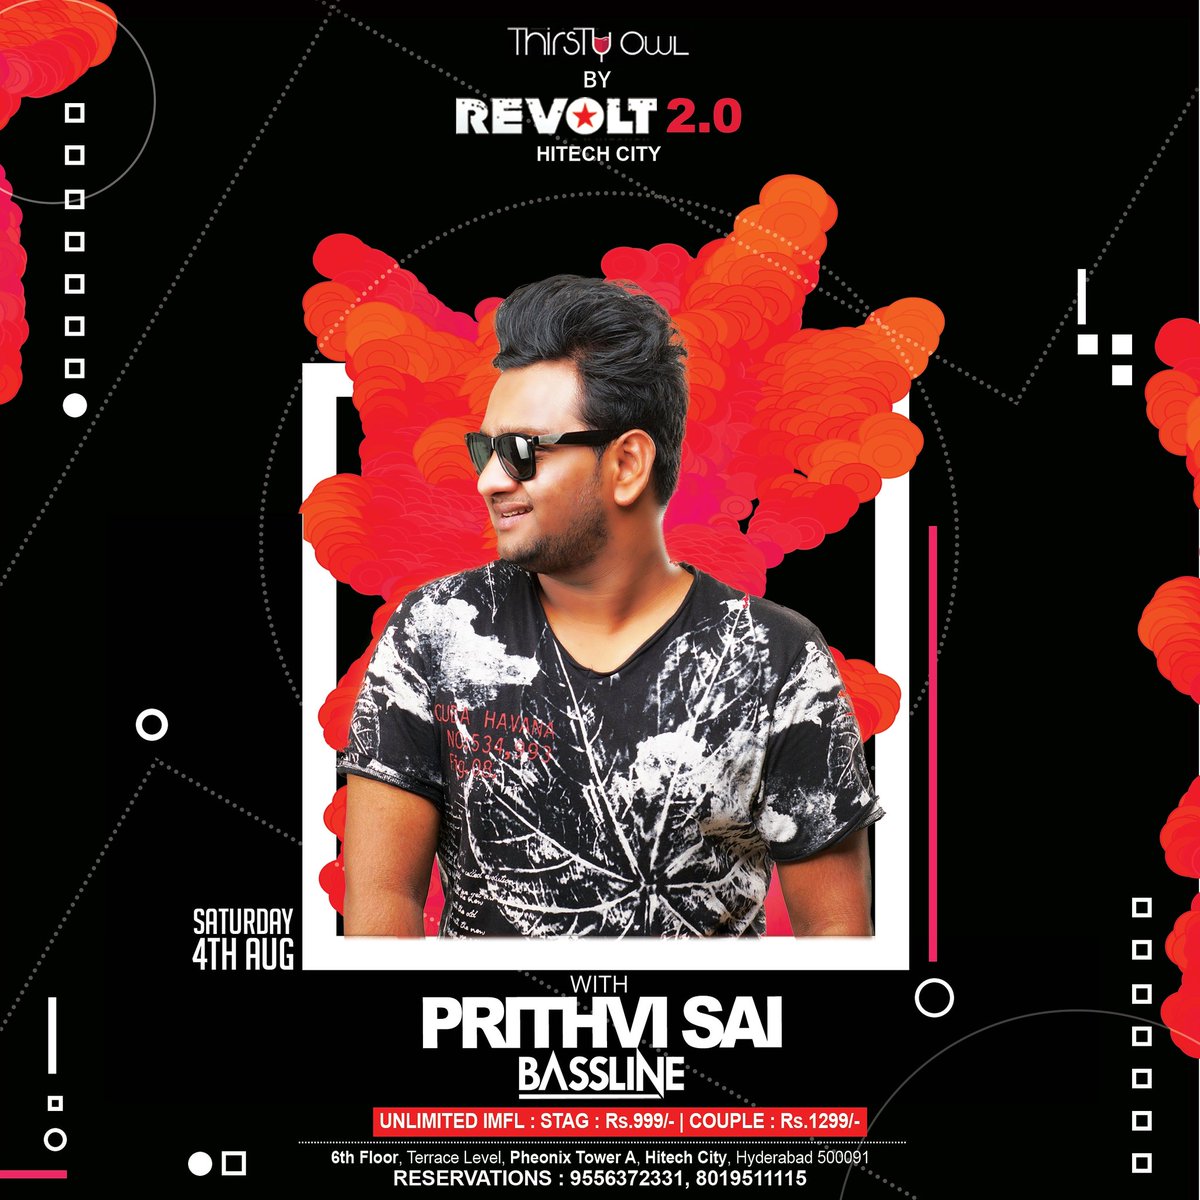 Are you ready for the weekend, yet? If not get ready to kill it on the dance floor of #ThirstyOwl by #Revolt2.0 with @DJPrithvi along
with #DjSunny electrifying tunes !!
Do not miss #Saturday
#unlimiteddrinks #food #fun #clubnight at #Revolt2.0 #DJPrithviSai
#Saturdayclubnight